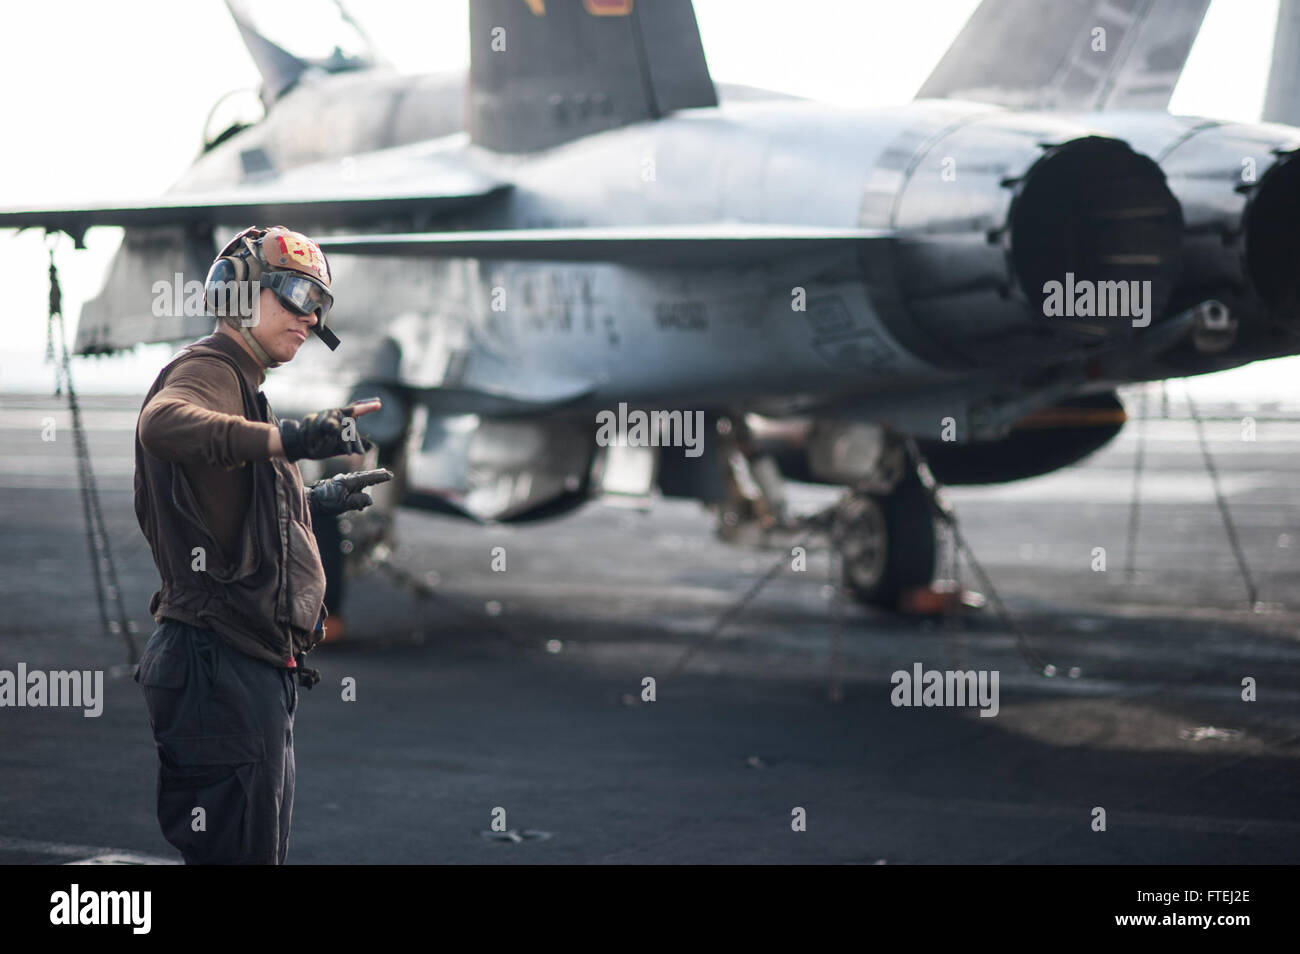 MEDITERRANEAN SEA (Oct. 31, 2014) Aviation Structural Mechanic Airman London Olan, from Toledo, Ohio, stands by as a safety observer as an F/A-18C Hornet, attached to the &quot;Golden Warriors&quot; of Strike Fighter Squadron (VFA) 87, conducts a low power turn on the flight deck of the aircraft carrier USS George H.W. Bush (CVN 77). George H.W. Bush, homeported in Norfolk, Va., is conducting naval operations in the U.S. 6th Fleet area of operations in support of U.S. national security interests in Europe. Stock Photo